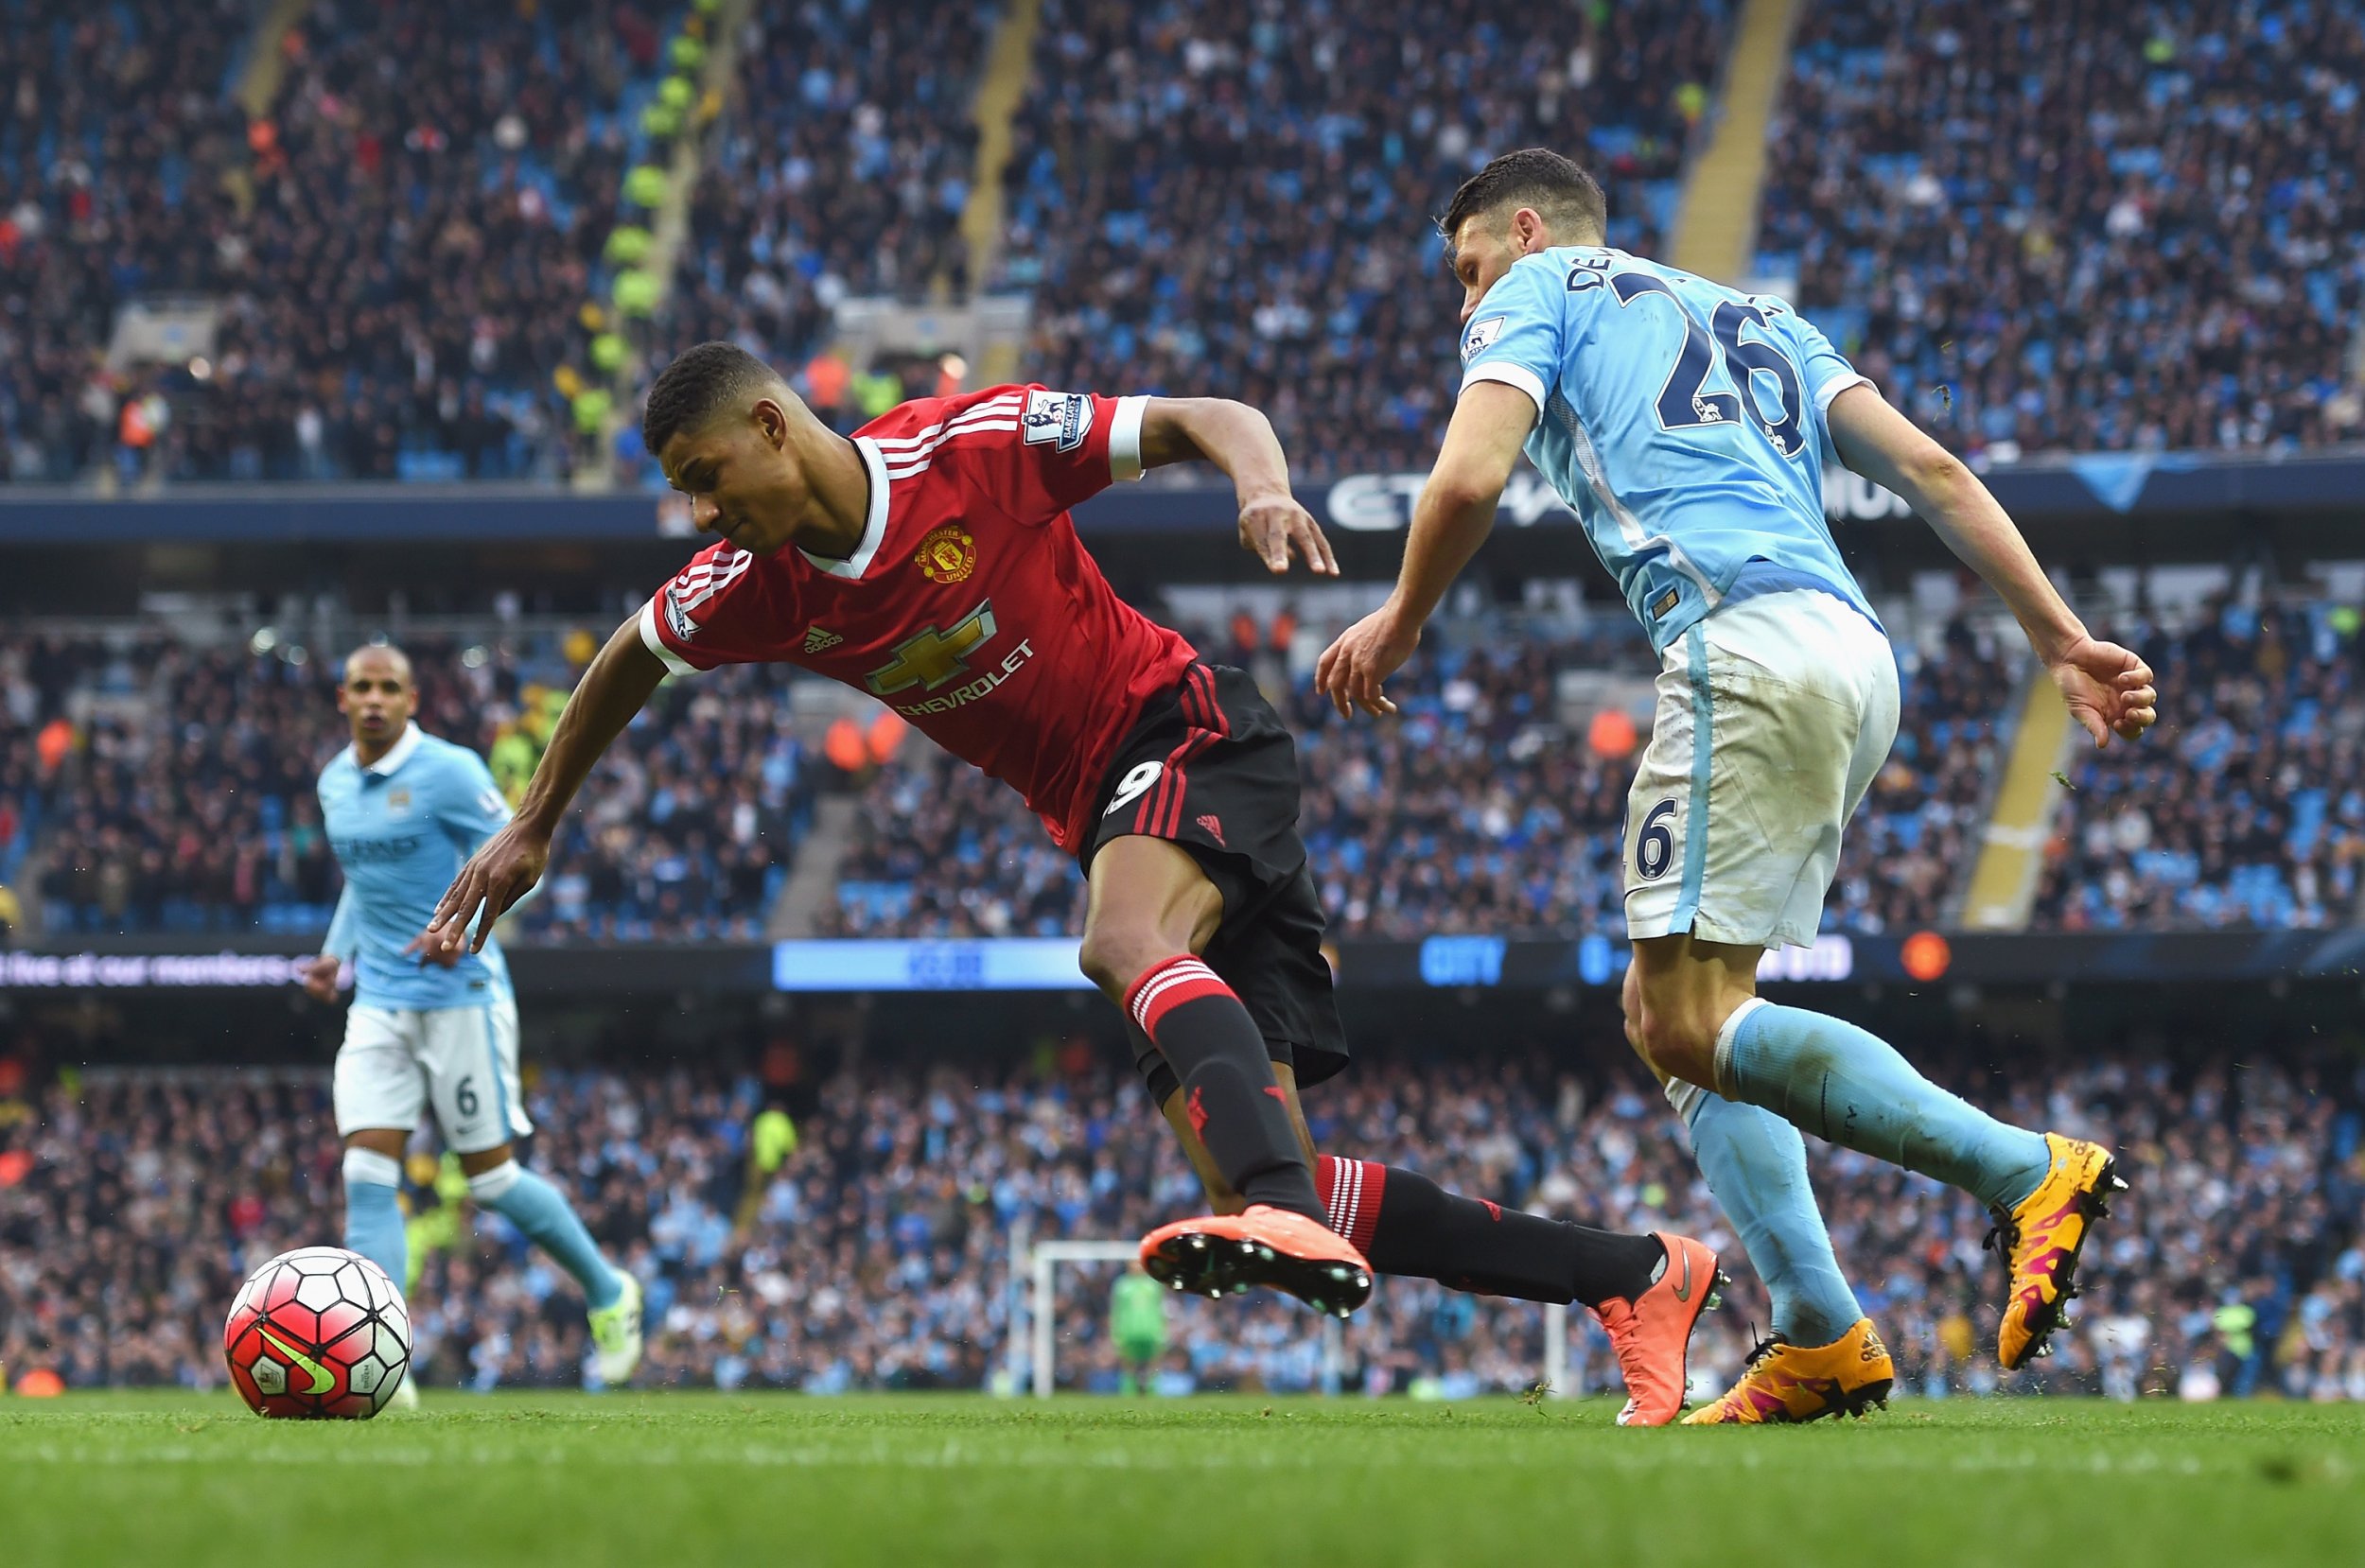 Marcus Rashford scored the only goal of the Manchester derby on Sunday.